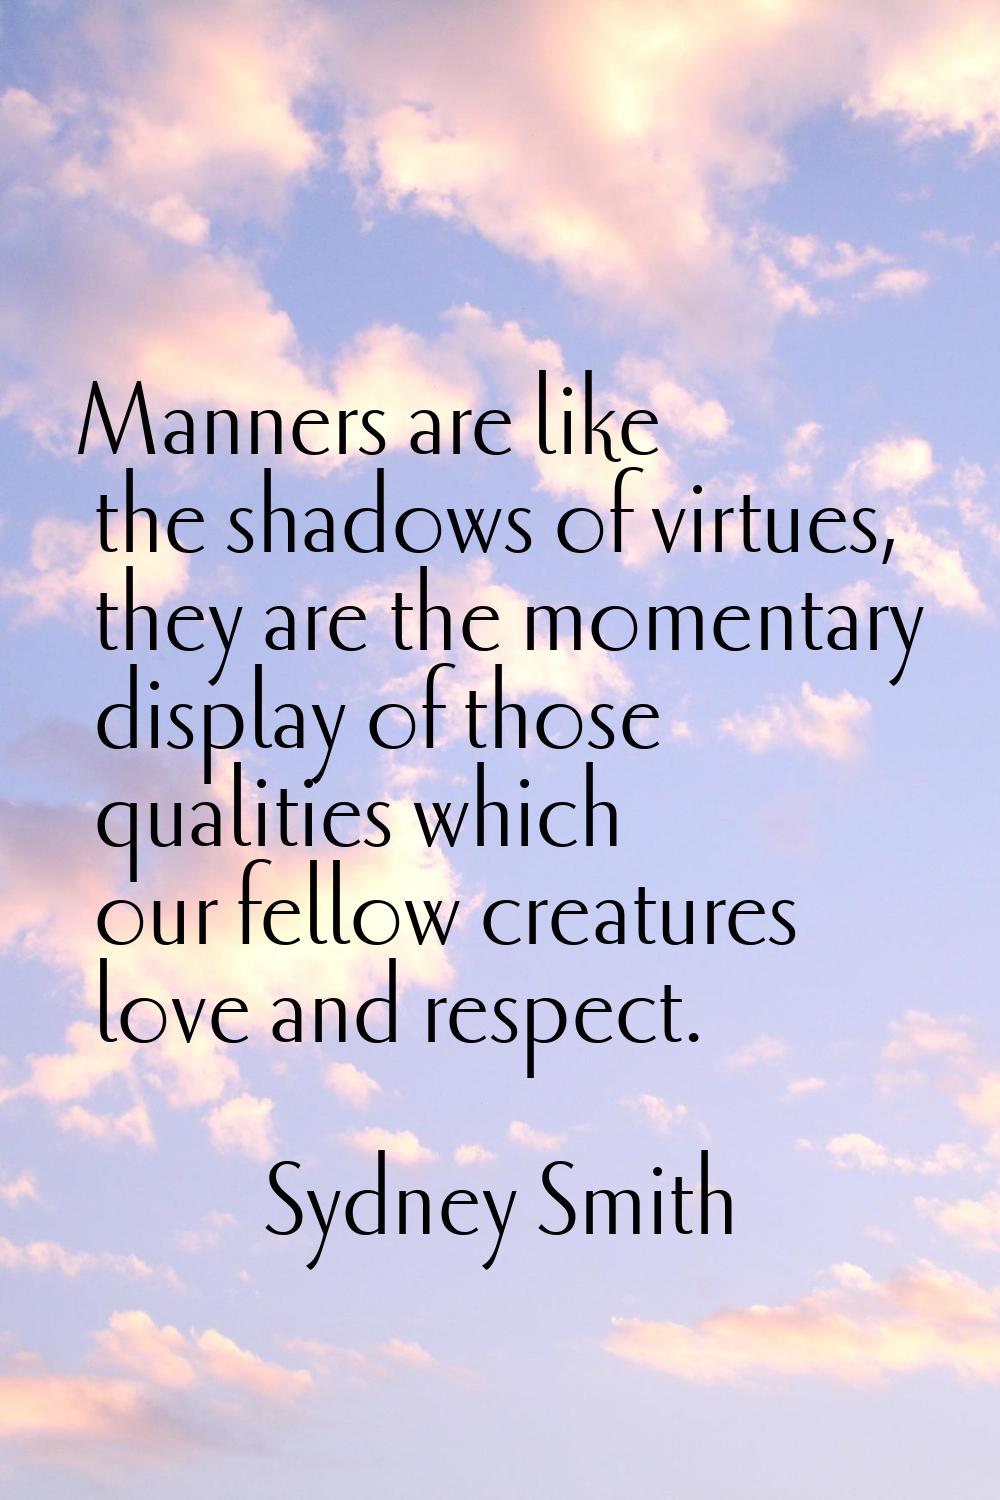 Manners are like the shadows of virtues, they are the momentary display of those qualities which ou